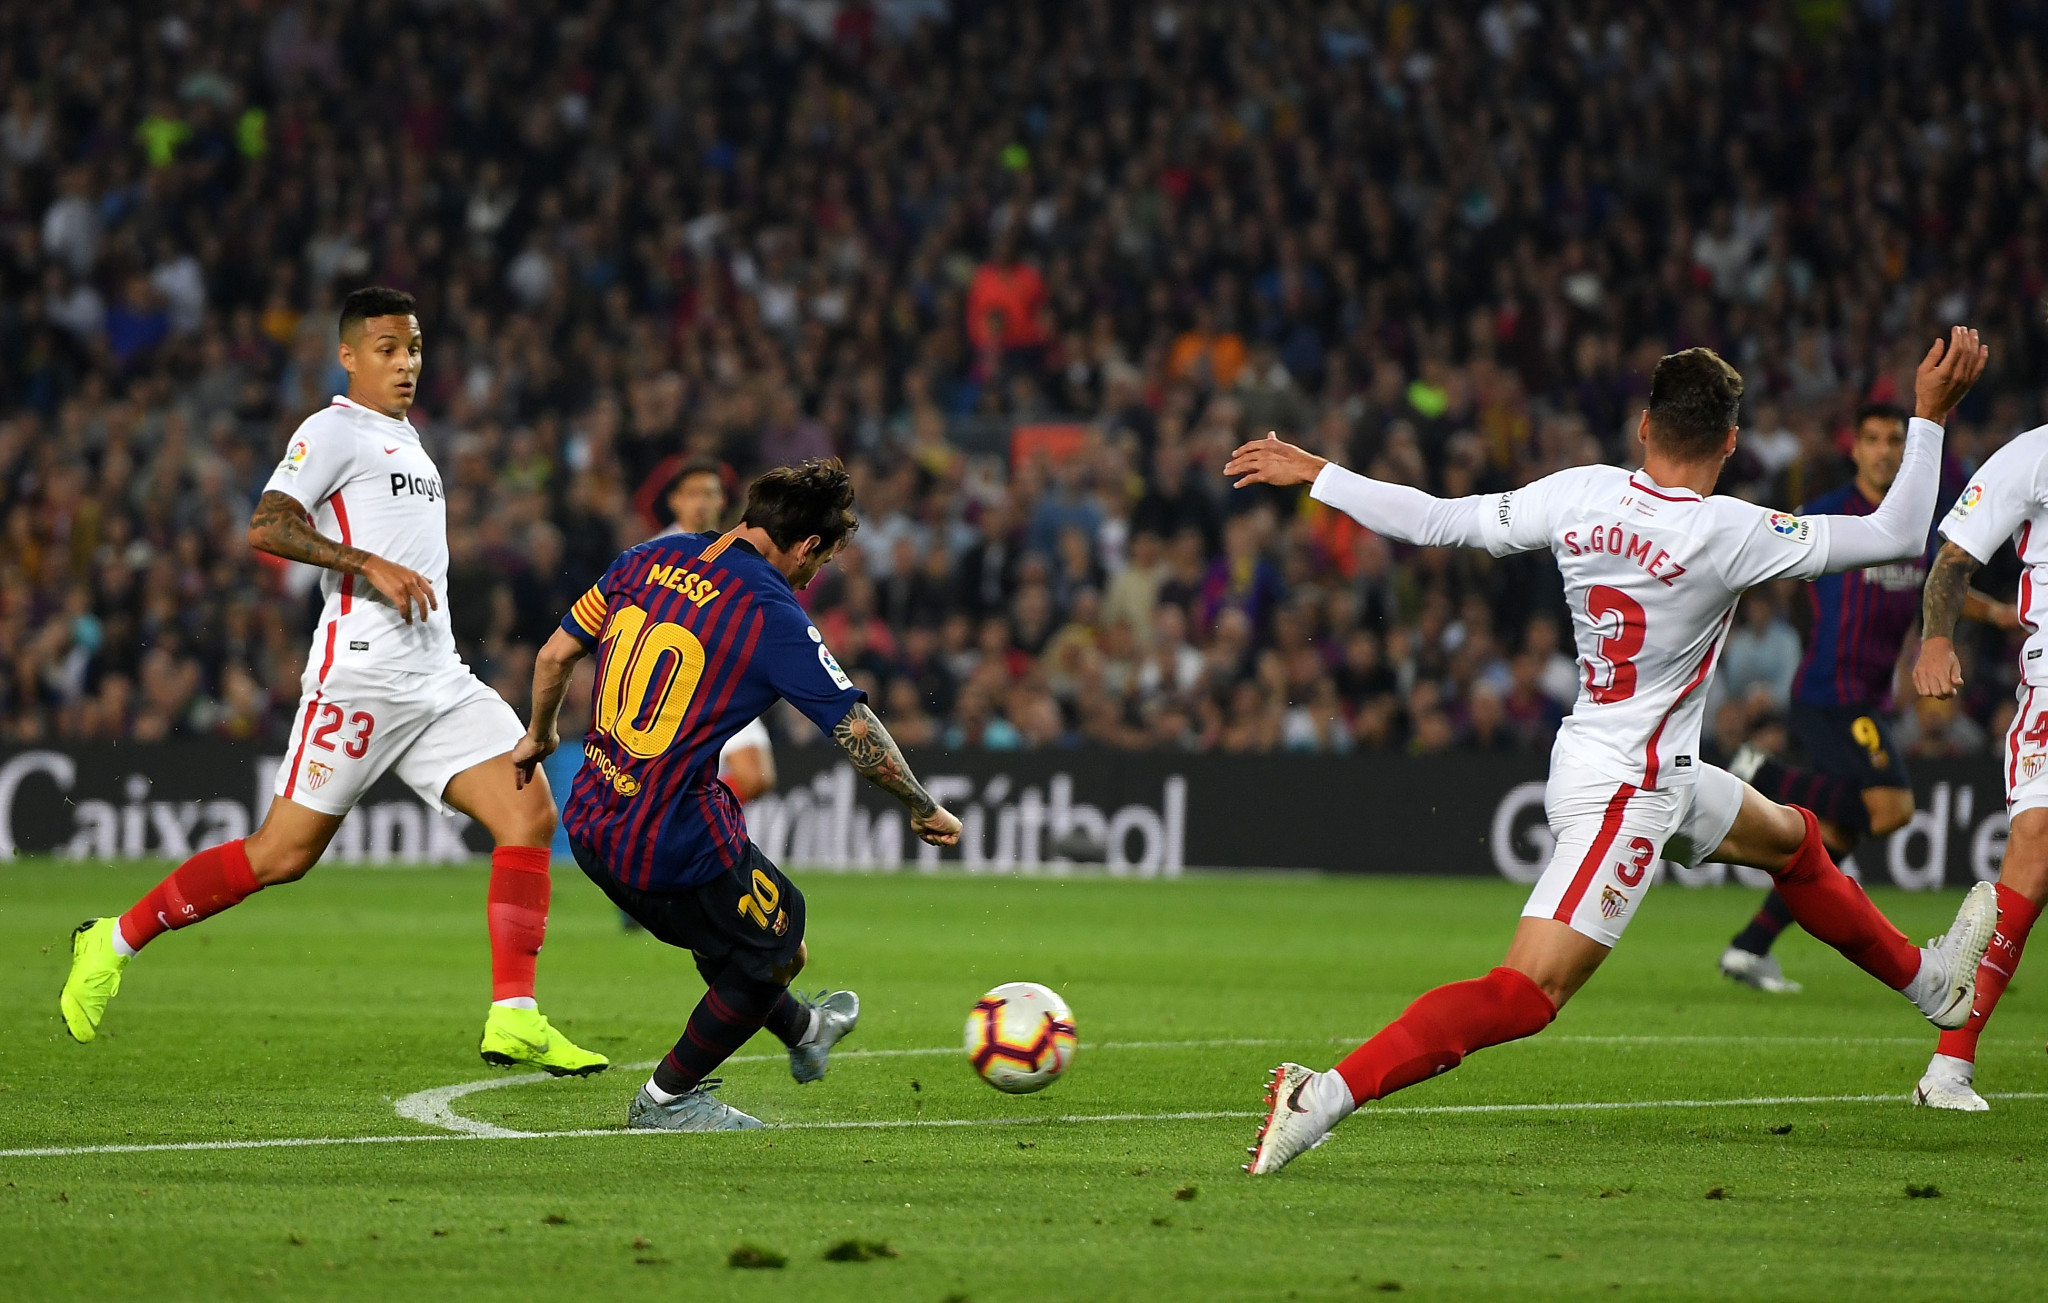 It had been hoped that the likes of five-time Ballon d'Or winner Lionel Messi could be showcased to America in a regular La Liga game ©Getty Images